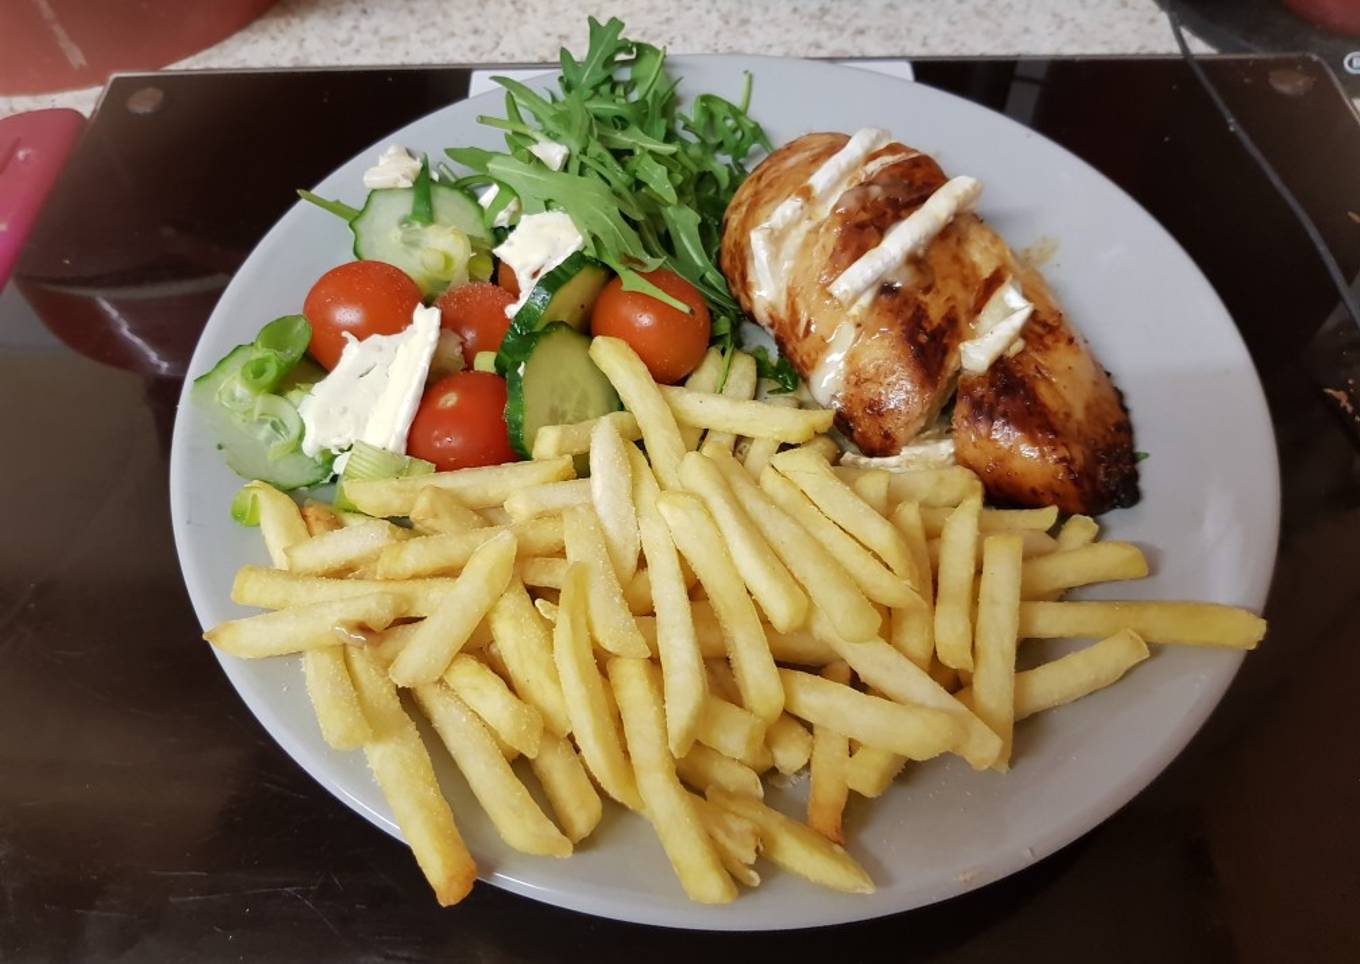 My Roast Breast of Chicken with Melted brié. With Chips & Salad